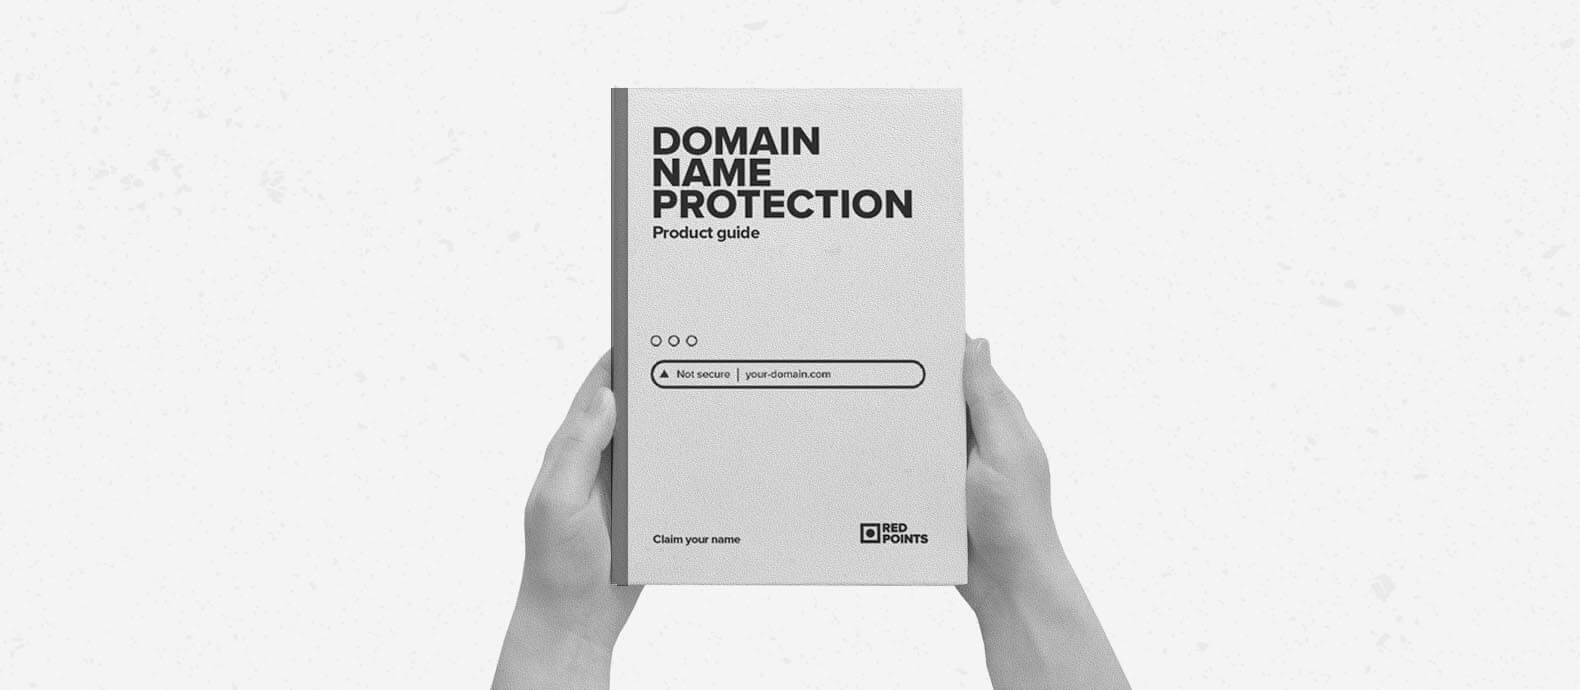 The ultimate guide on how to protect domain names